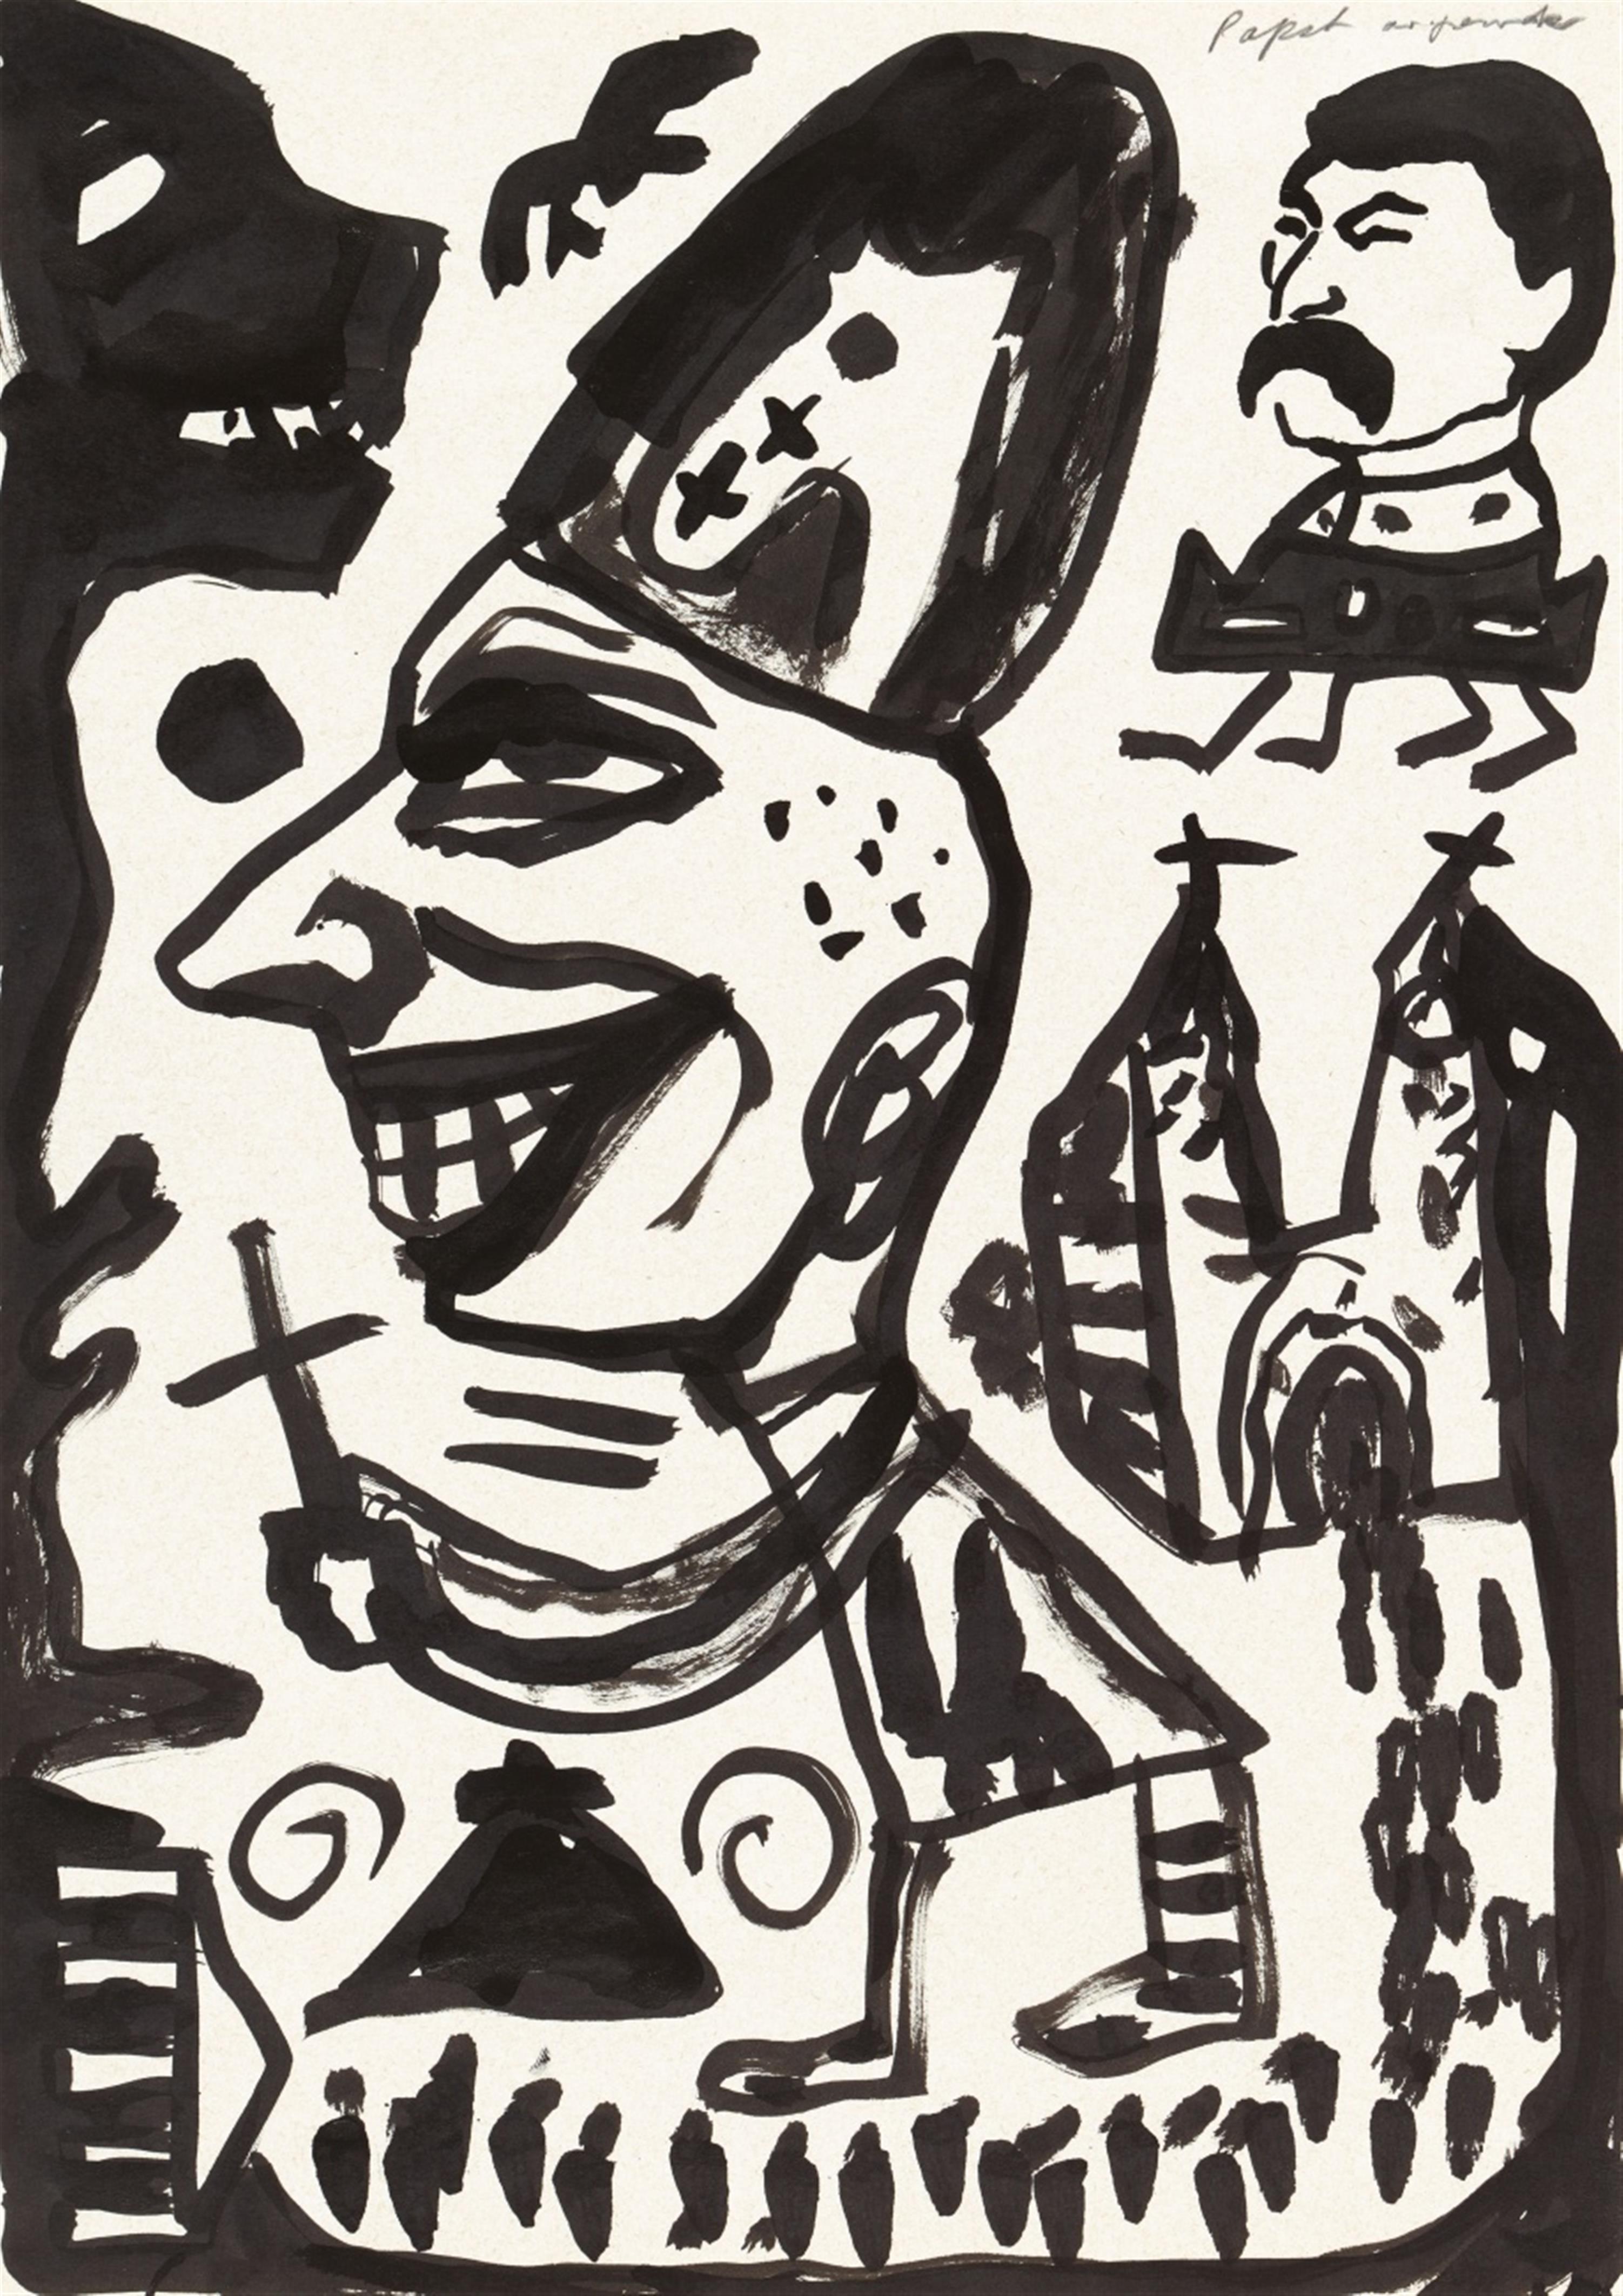 A.R. Penck - Pabst in Polen - image-4